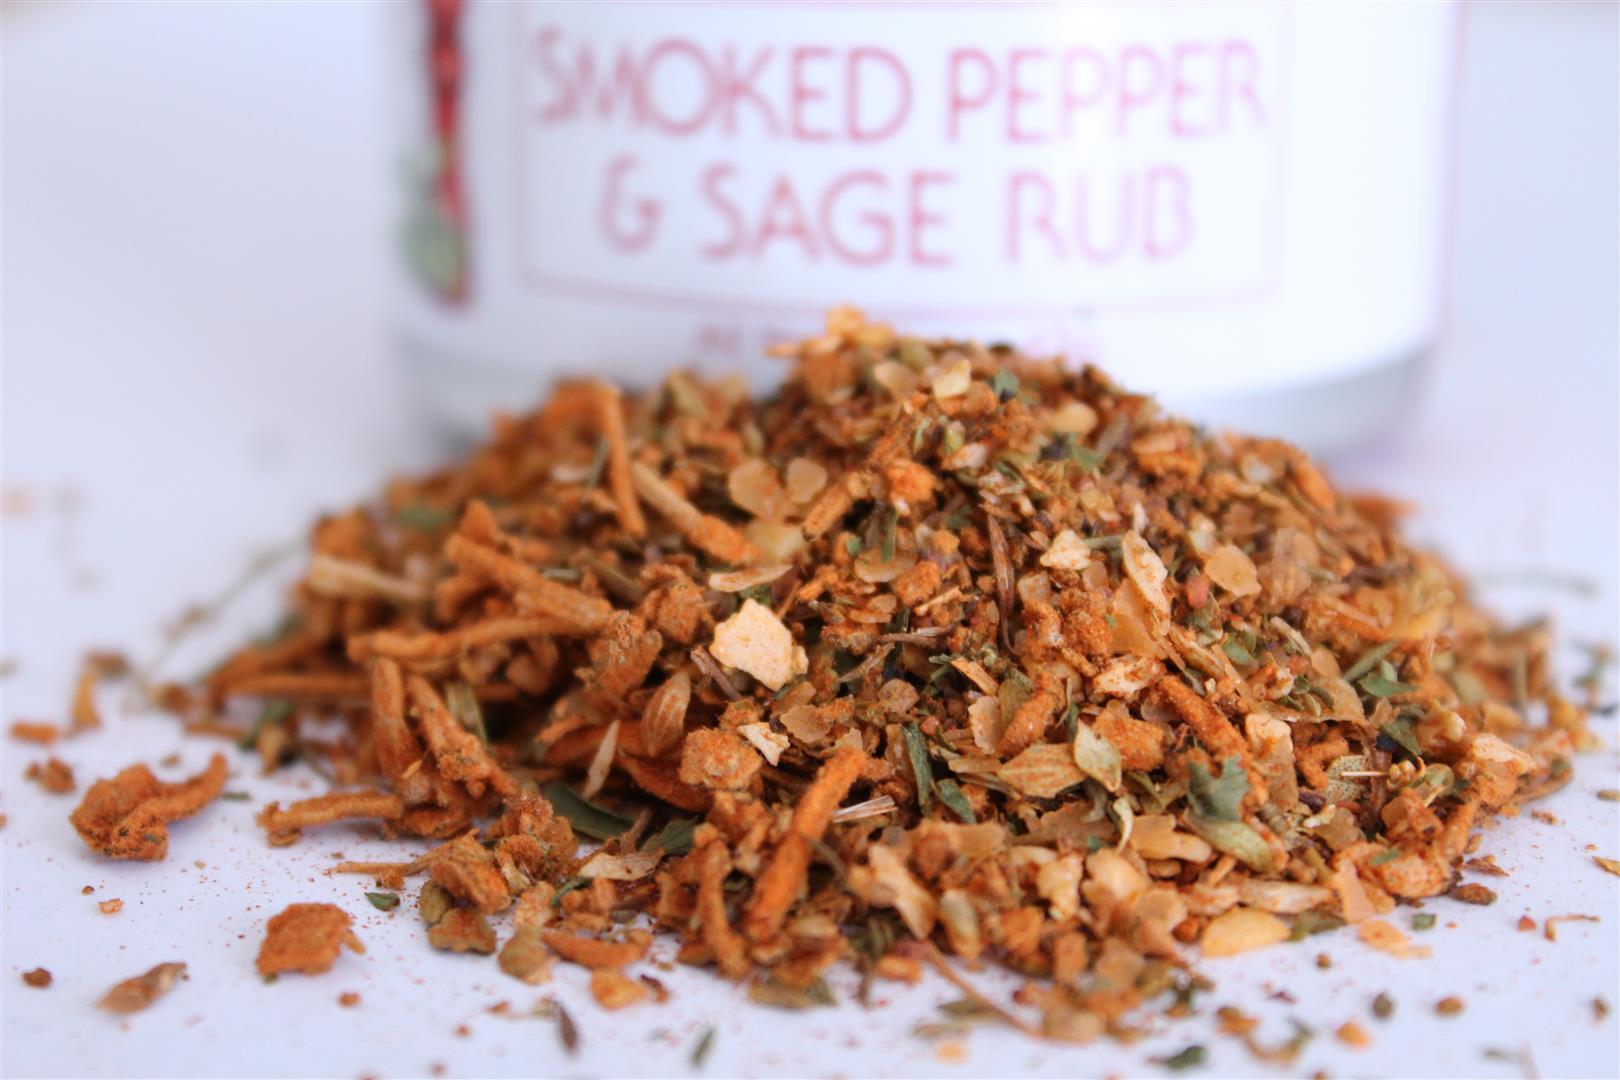 Smoked Pepper and Sage Rub - The Epicentre 45g